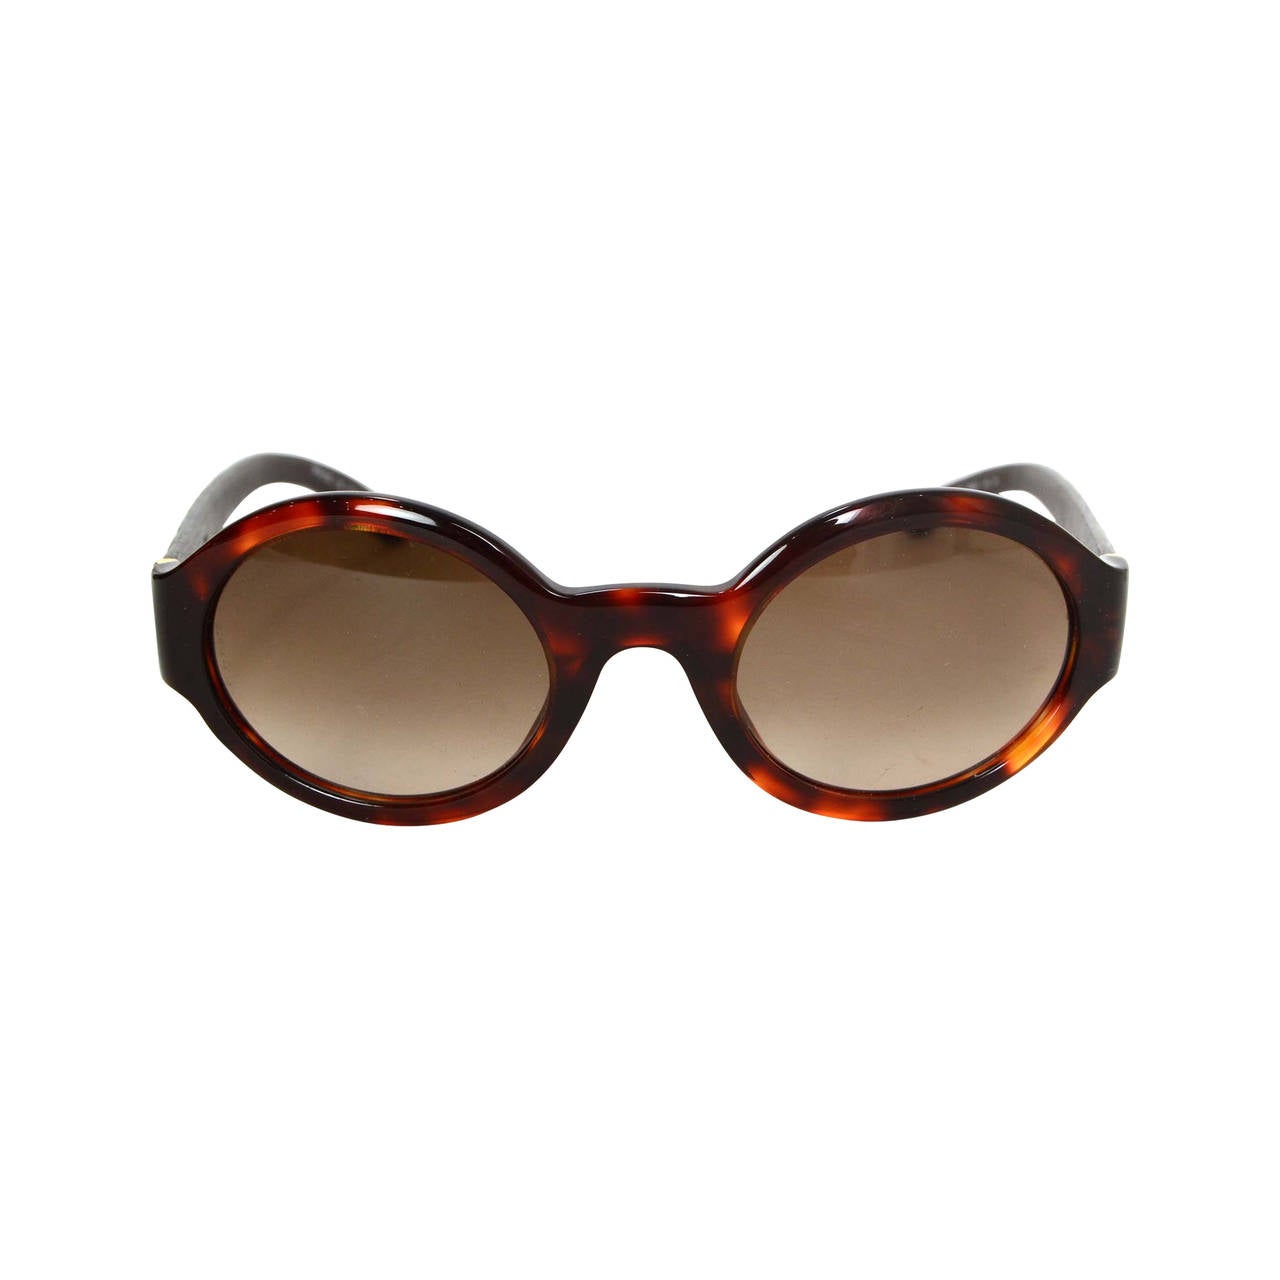 CHANEL Tortoise Shell & Quilted Leather Round Sunglasses